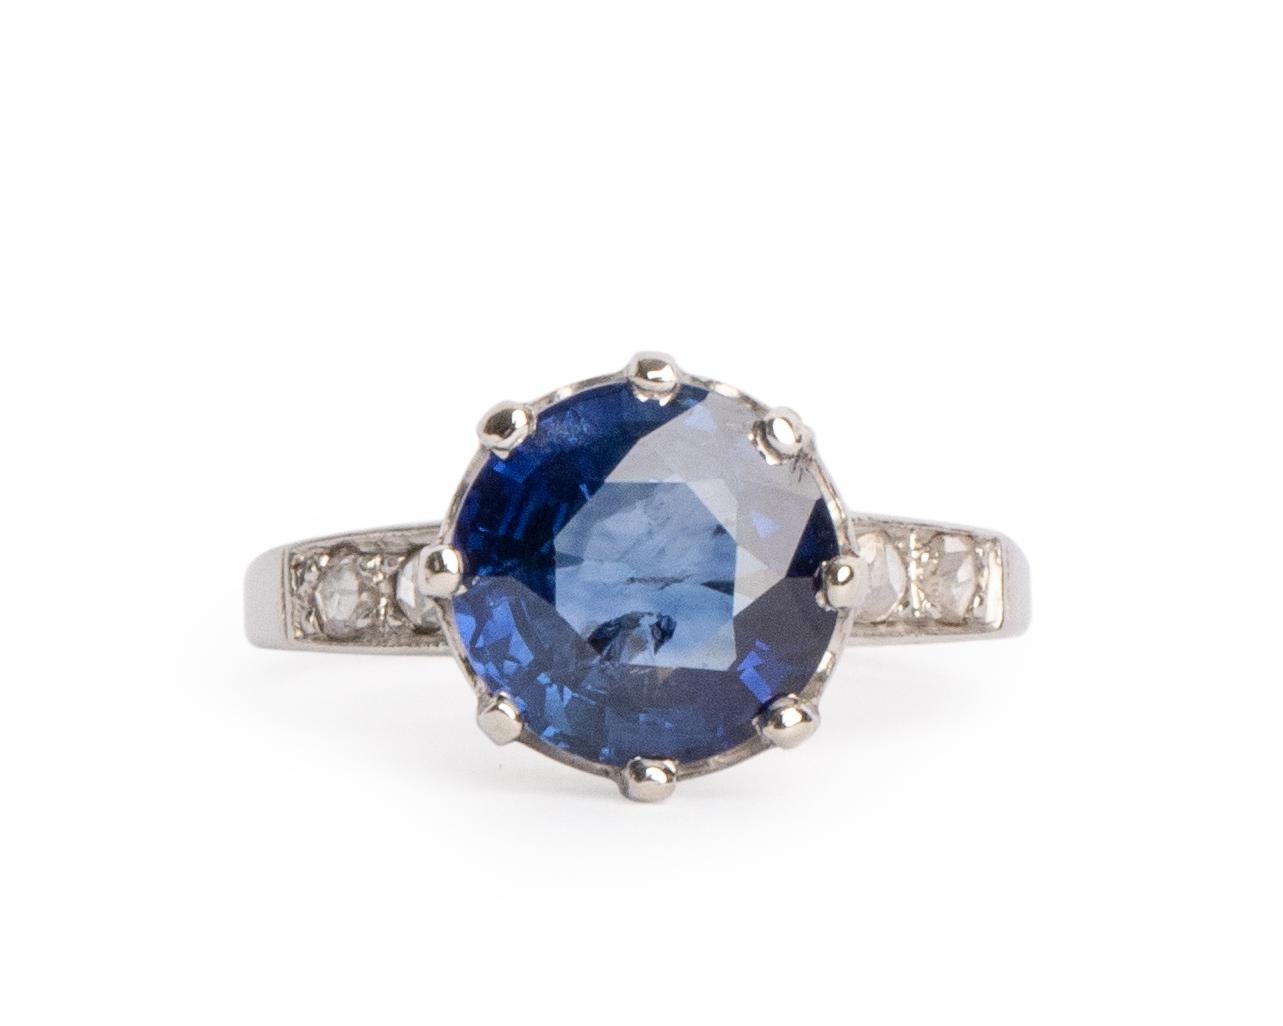 This is an gorgeous example of an Edwardian era sapphire ring! The stunning 3.51 carat deep royal blue sapphire sits proudly in a crown like eight prong solitaire head! Adding to the already impressive history of this piece is the fact the that the